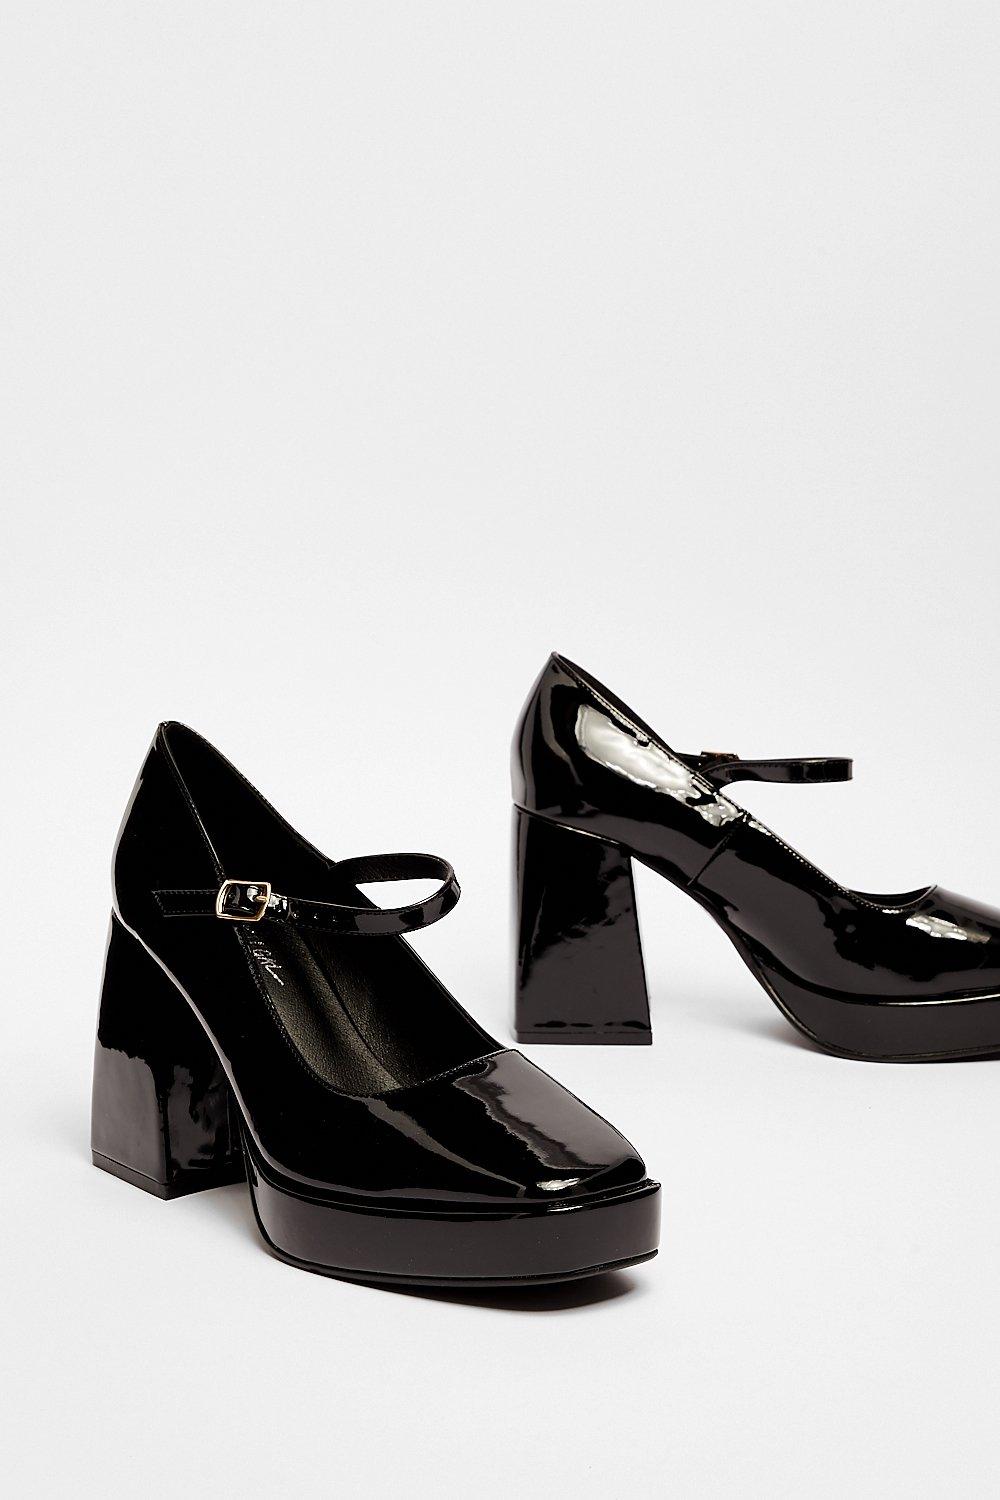 Black Patent Leather Mary Jane Shoes | vlr.eng.br